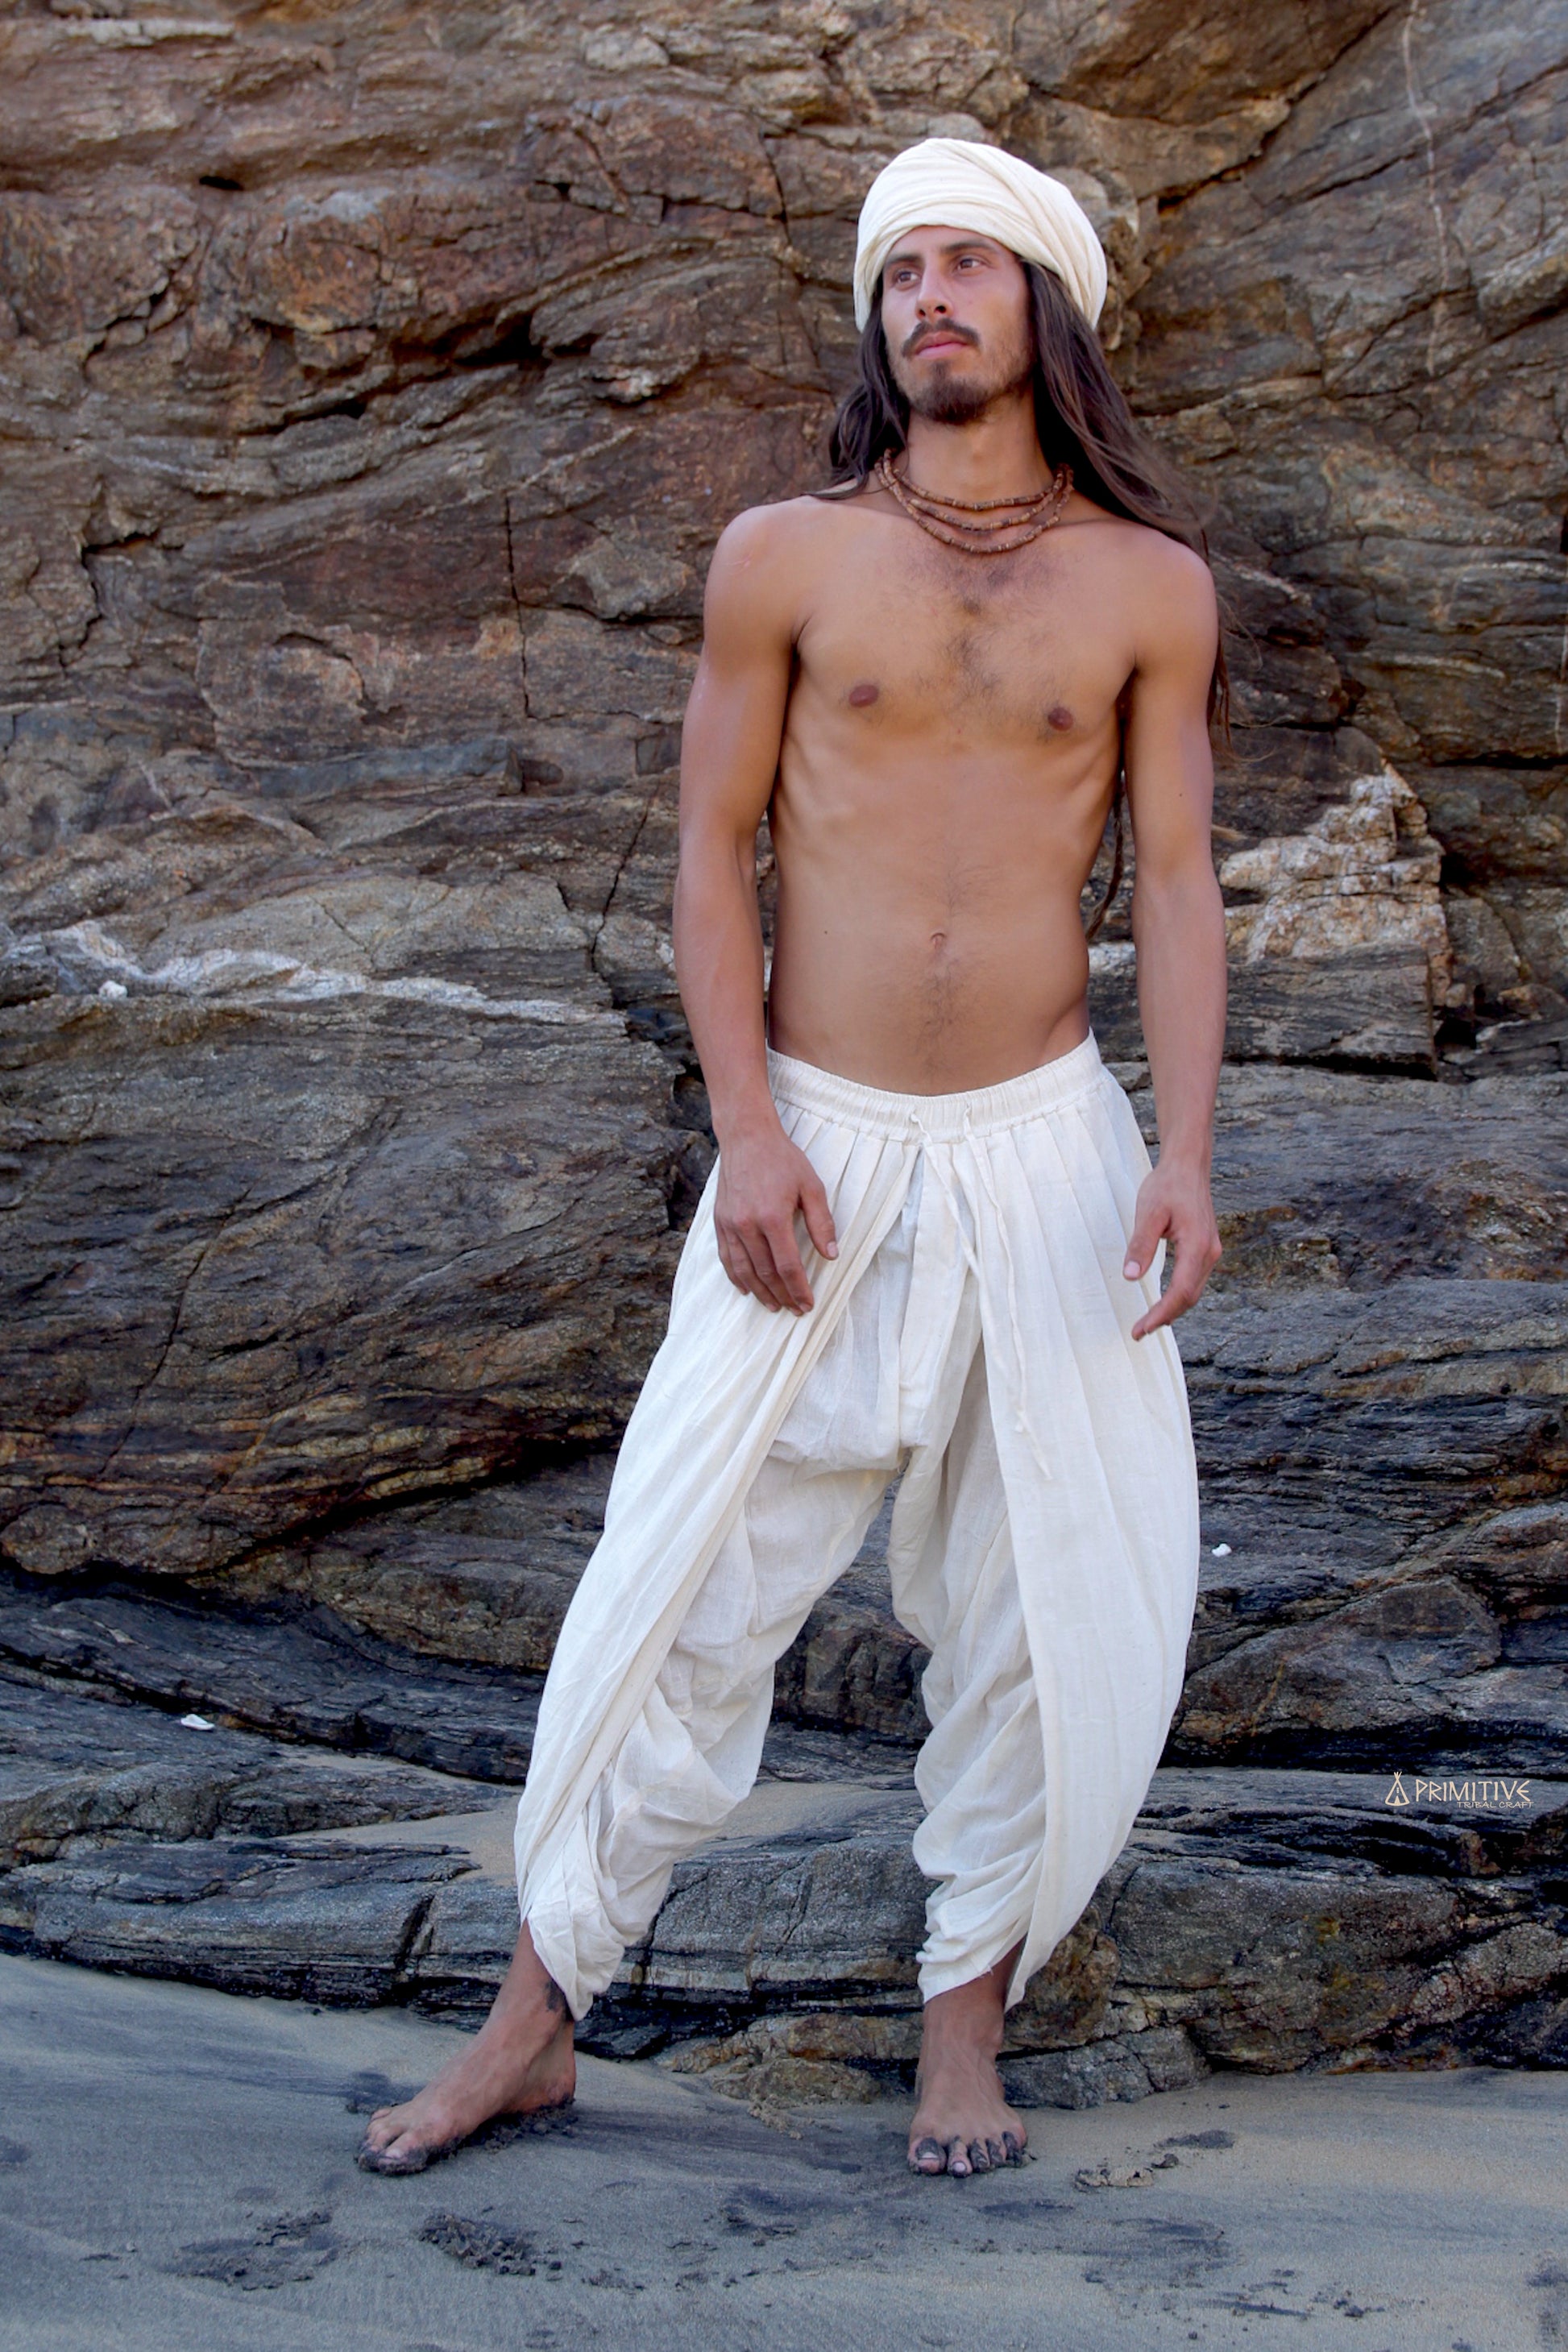 Buy yogees Ready to Wear Yoga Solid Unisex Pull-on Dhoti Pants for Men in  Pure Cotton with Border Detailing. (Large) White at Amazon.in